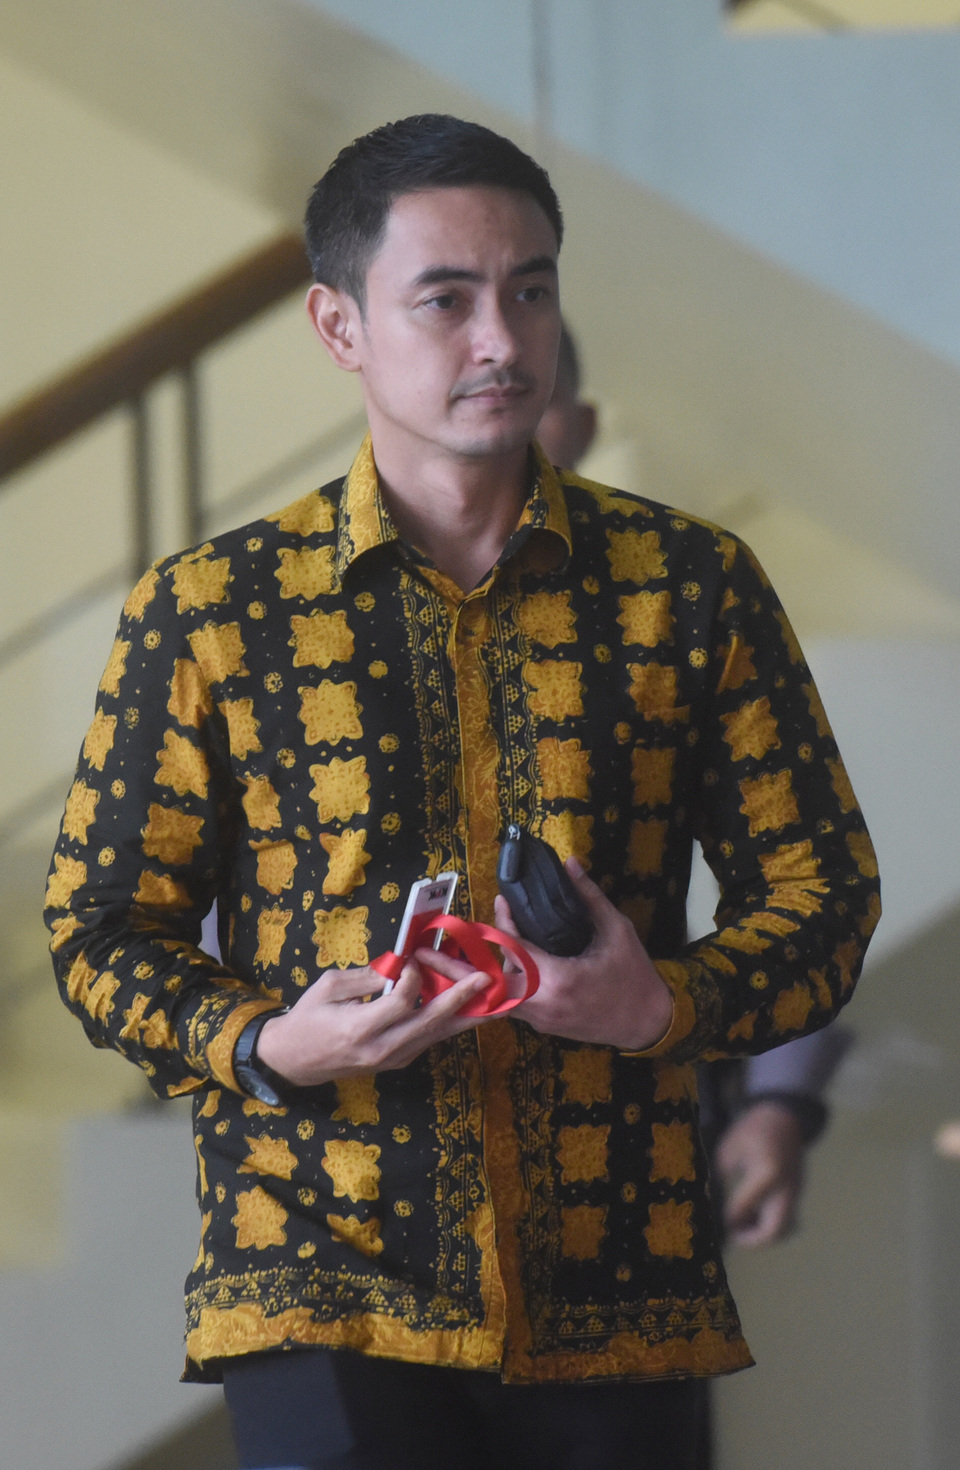  Corruption Eradication Commission, or KPK, on Friday (02/02) declared Jambi governor Zumi Zola as a suspect related with a bribery case, the agency’s commissioner announced. (ANTARA Photo/Akbar Nugroho Gumay)